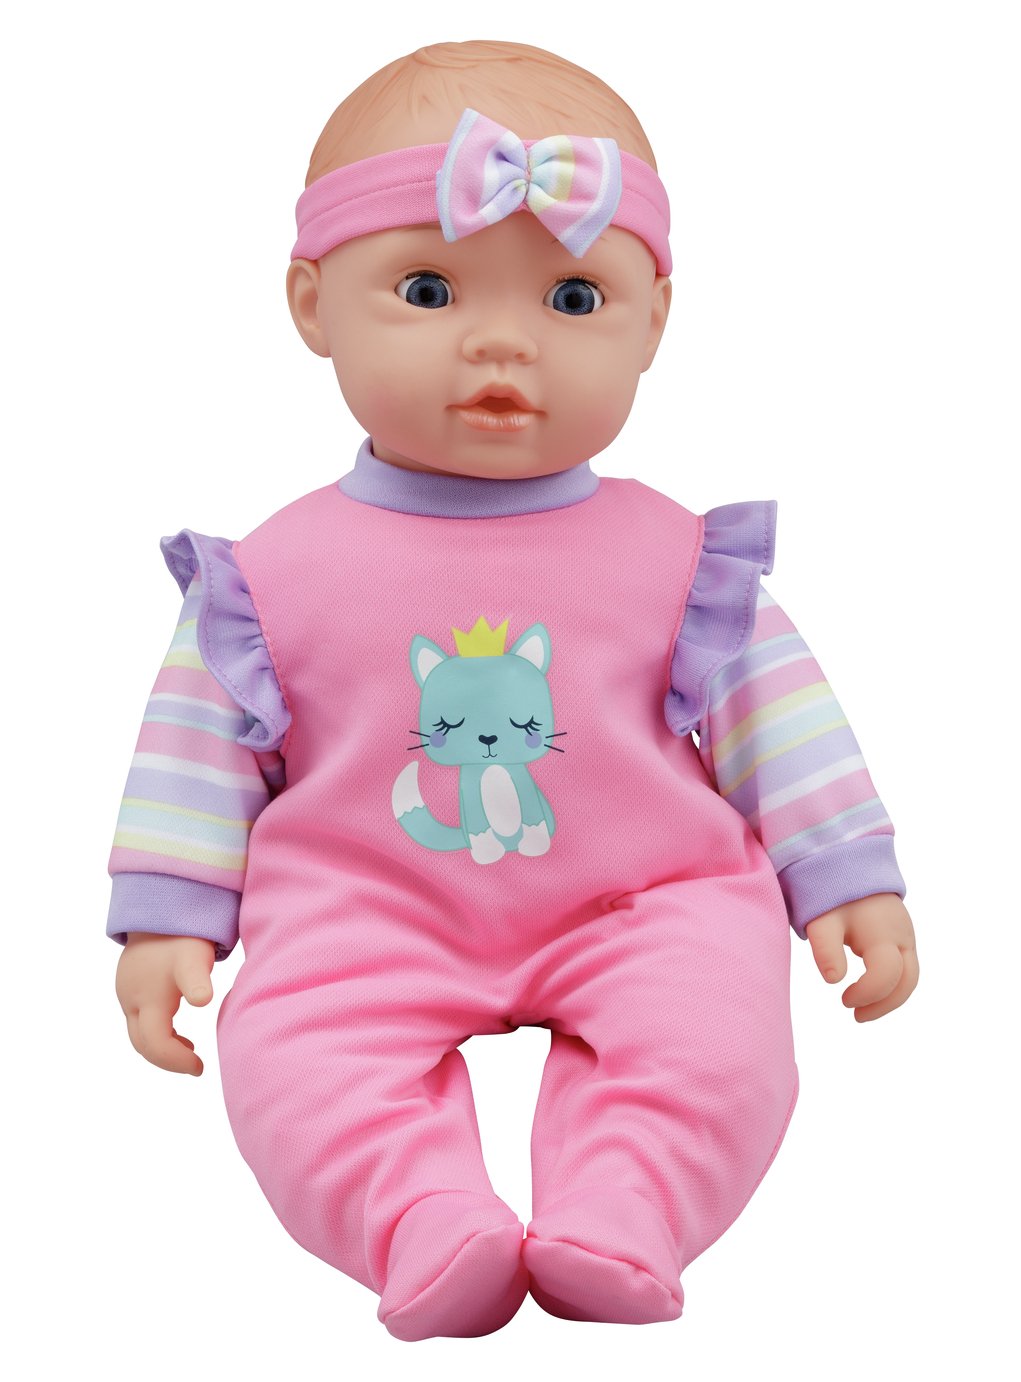 chad valley babies to love cuddly ava doll